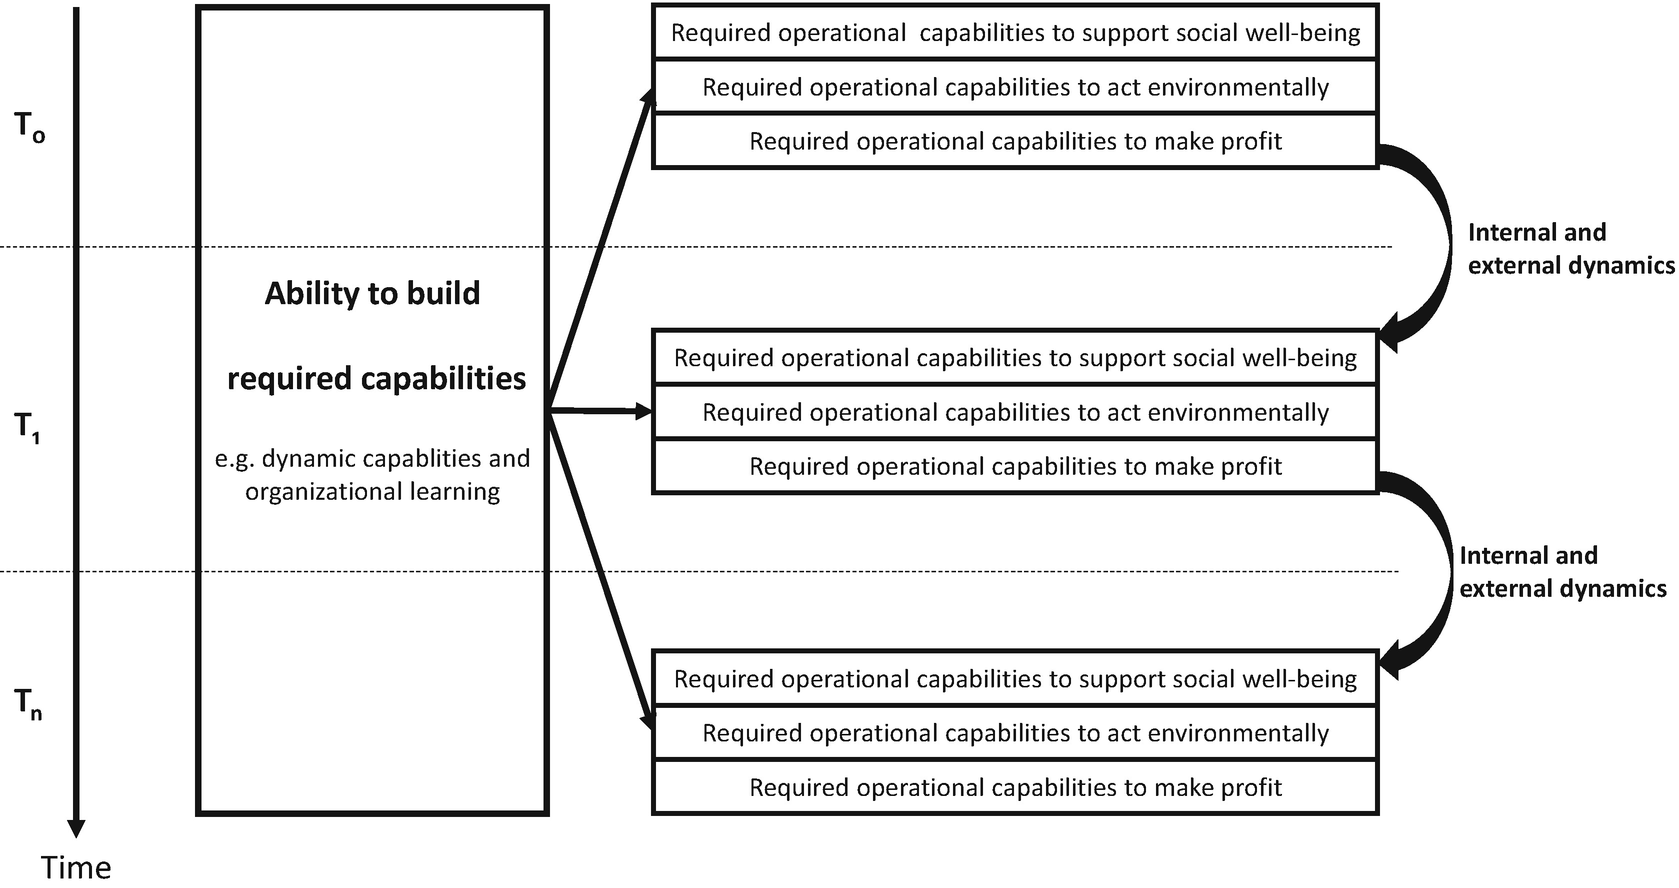 Capability Building Through Dynamic Capabilities and Organizational  Learning | SpringerLink